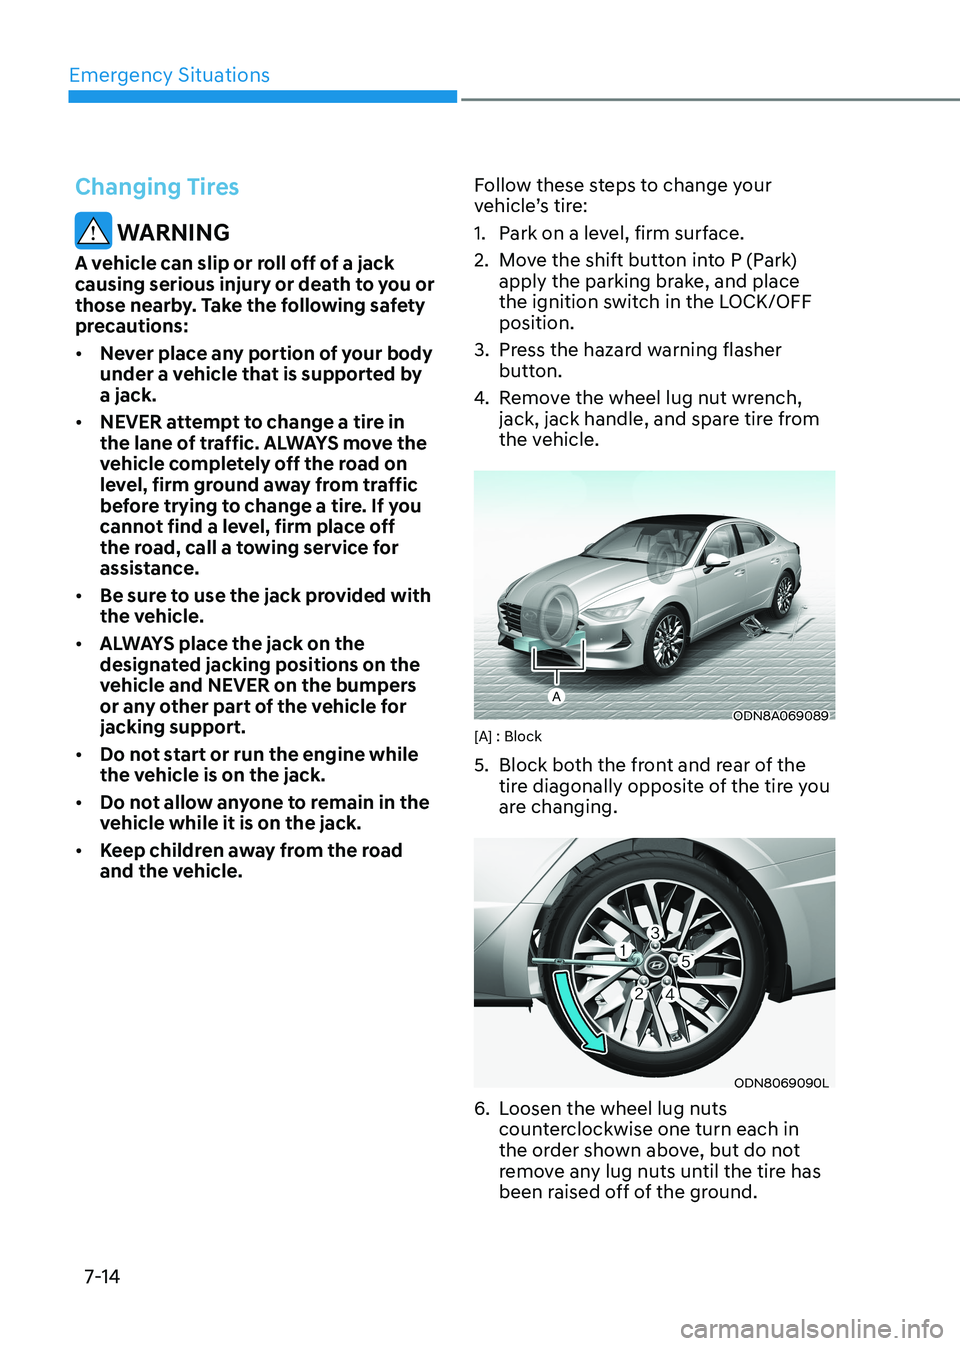 HYUNDAI SONATA 2023  Owners Manual Emergency Situations
7-14
Changing Tires
 WARNING
A vehicle can slip or roll off of a jack  
causing serious injury or death to you or 
those nearby. Take the following safety 
precautions: •	 Never